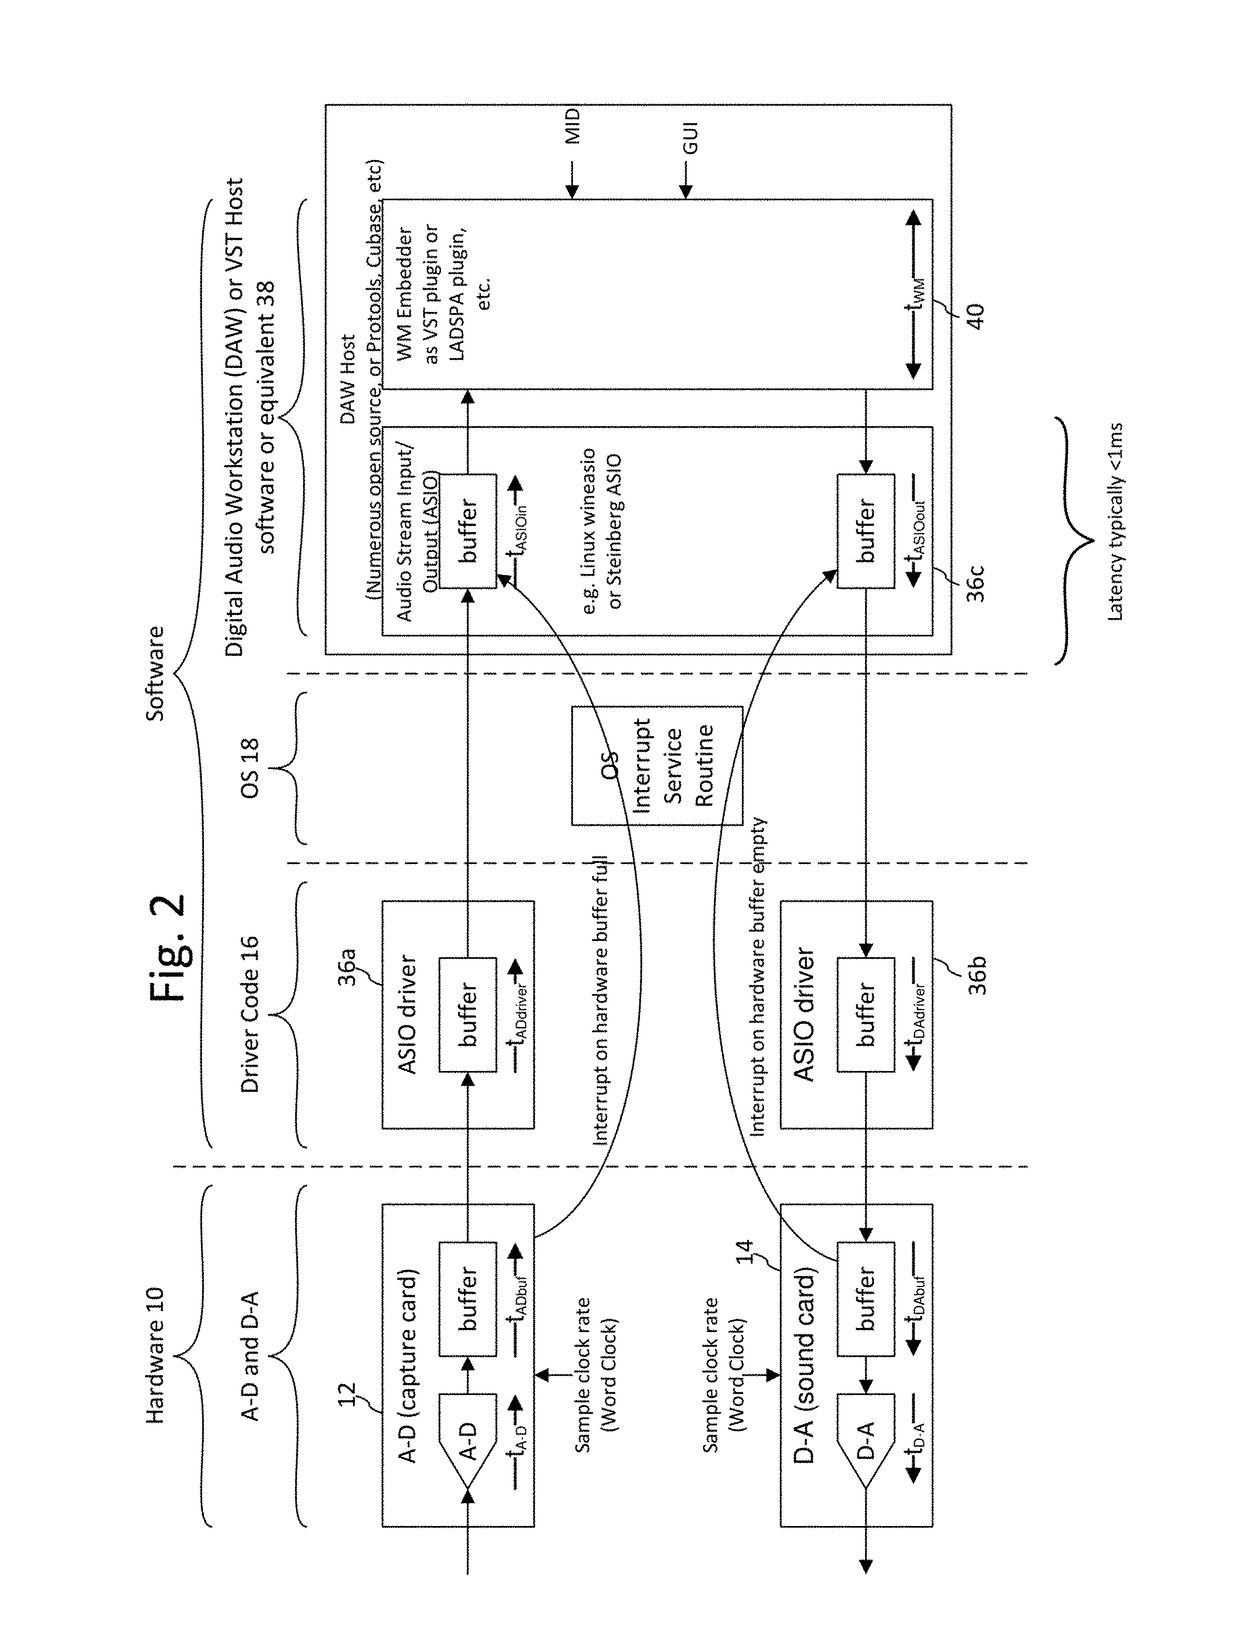 Timeline reconstruction using dynamic path estimation from detections in audio-video signals